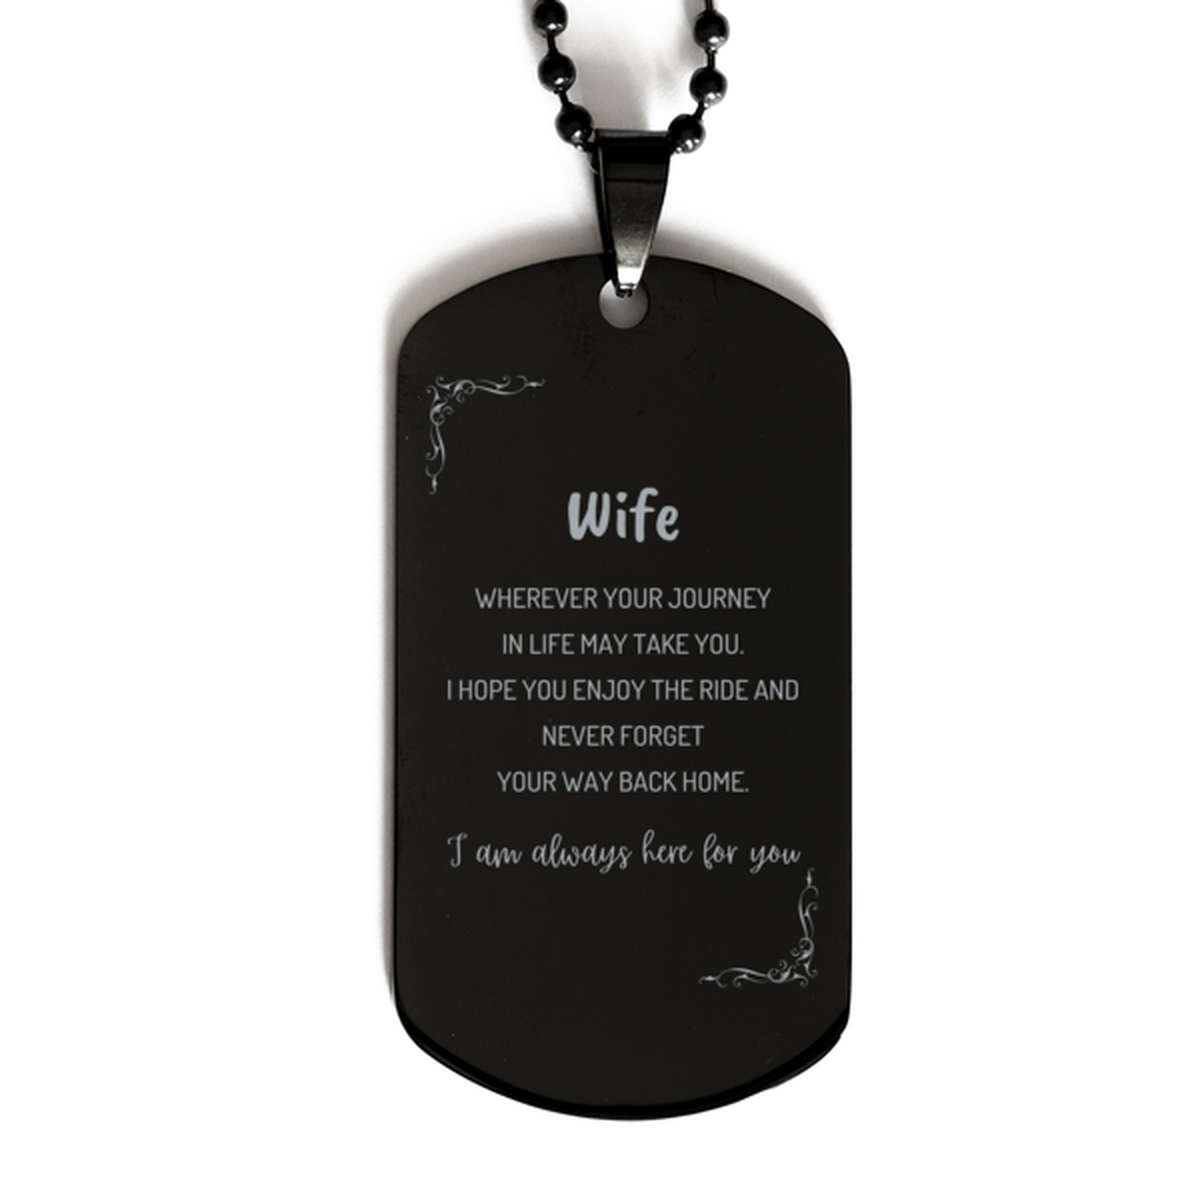 Wife wherever your journey in life may take you, I am always here for you Wife Black Dog Tag, Awesome Christmas Gifts For Wife, Wife Birthday Gifts for Men Women Family Loved One